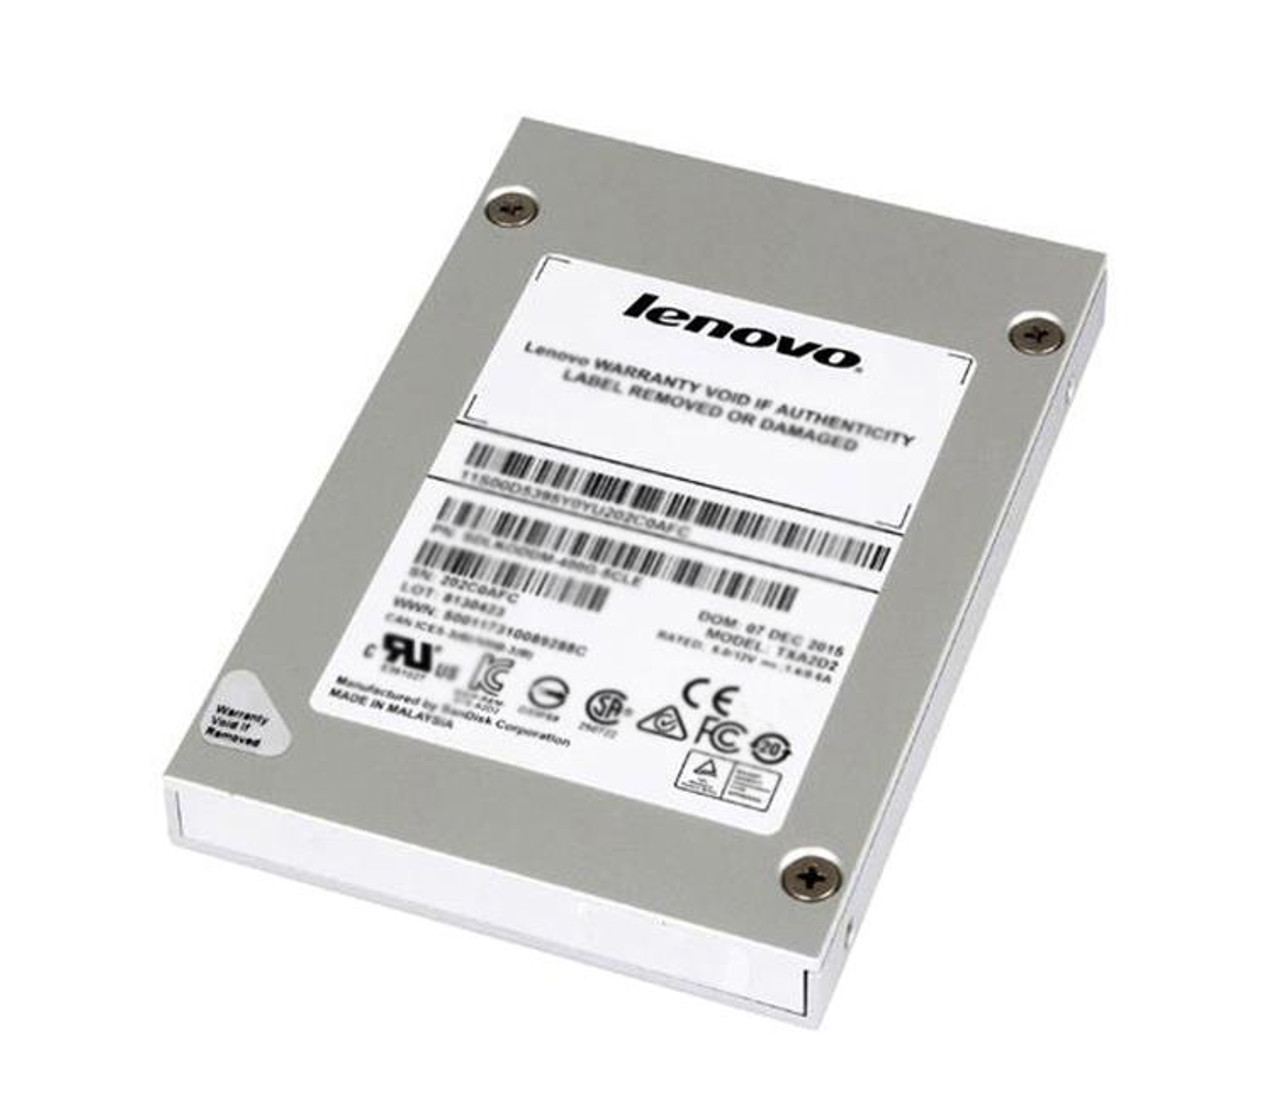 00XH260 Lenovo 240GB SATA 6Gbps Hot Swap 2.5-inch Internal Solid State Drive (SSD) for ThinkServer TS460